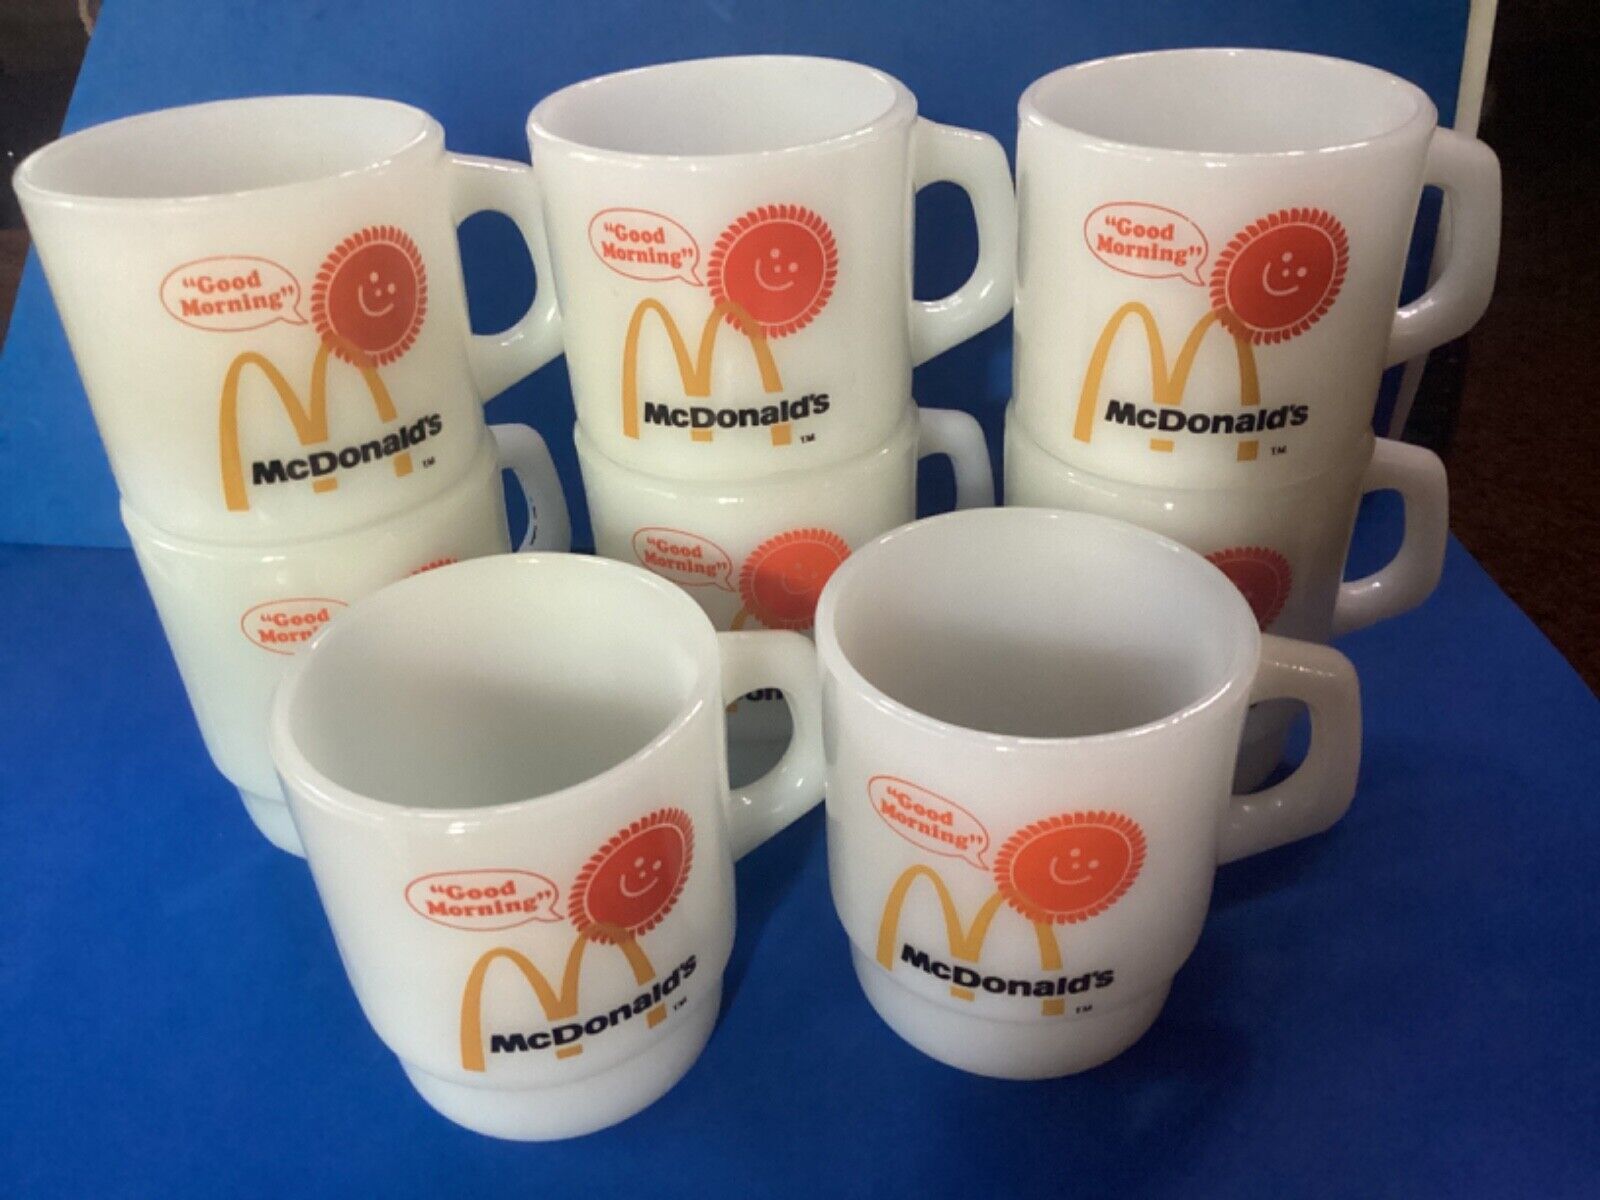 VINTAGE * 1970’s * FIRE KING * McDONALD’S COFFEE MUGS * 8 AVAILABLE * MILK WHITE